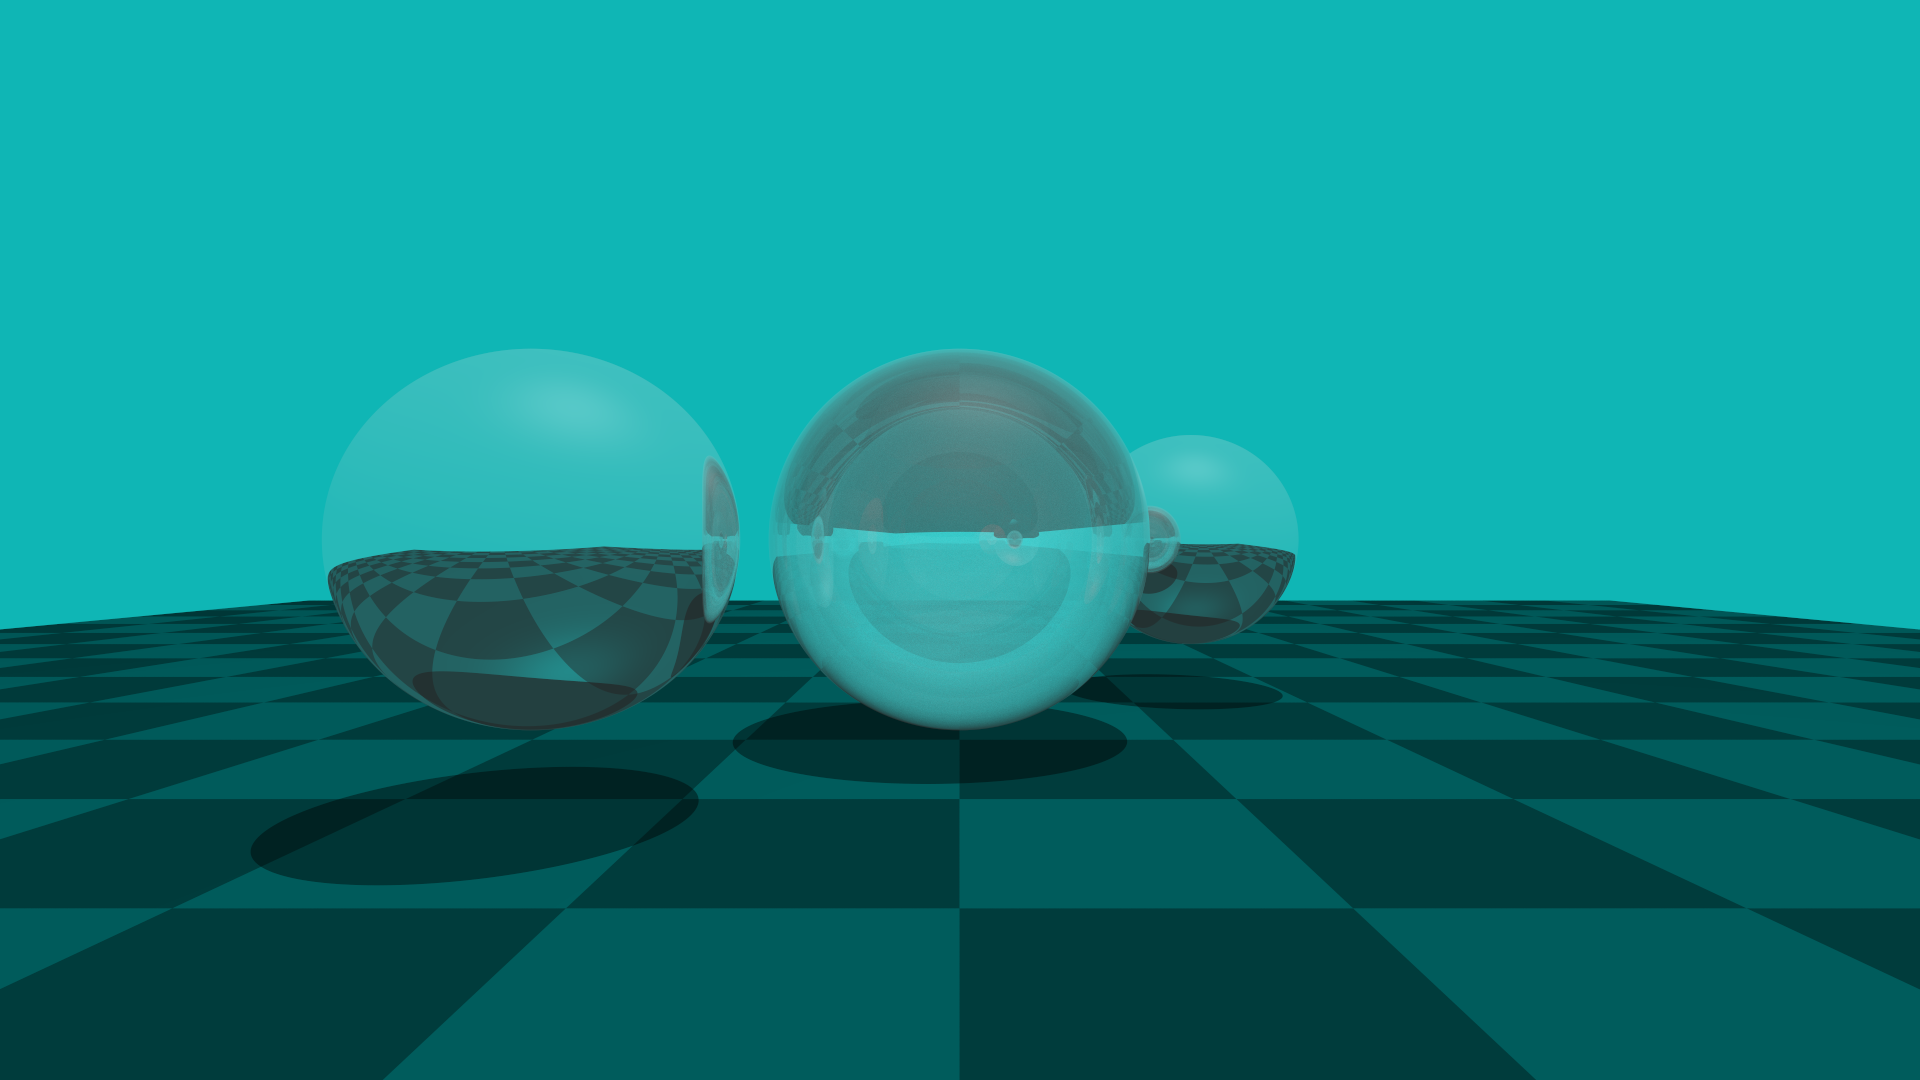 ray tracing result
08.10.2022